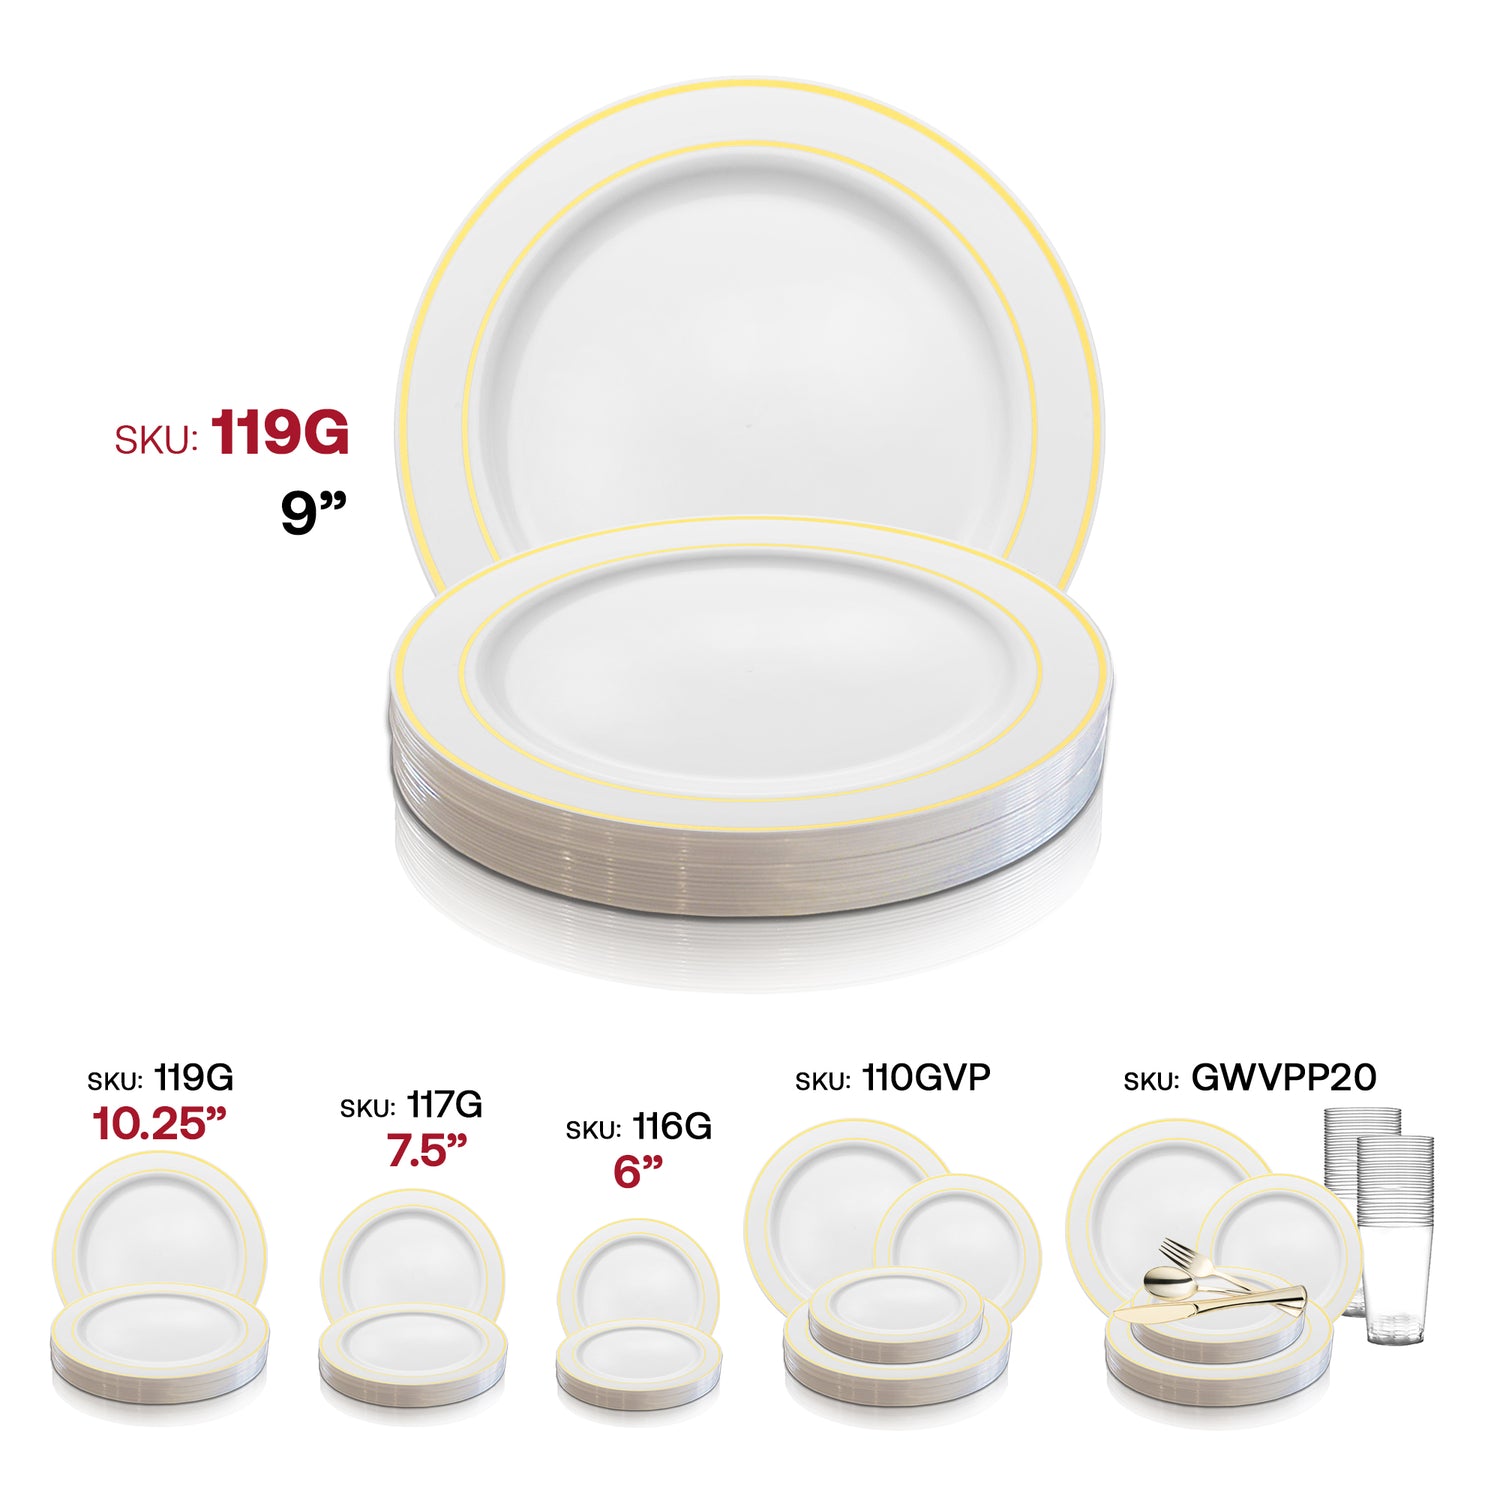 White with Gold Edge Rim Plastic Buffet Plates (9") SKU | The Kaya Collection